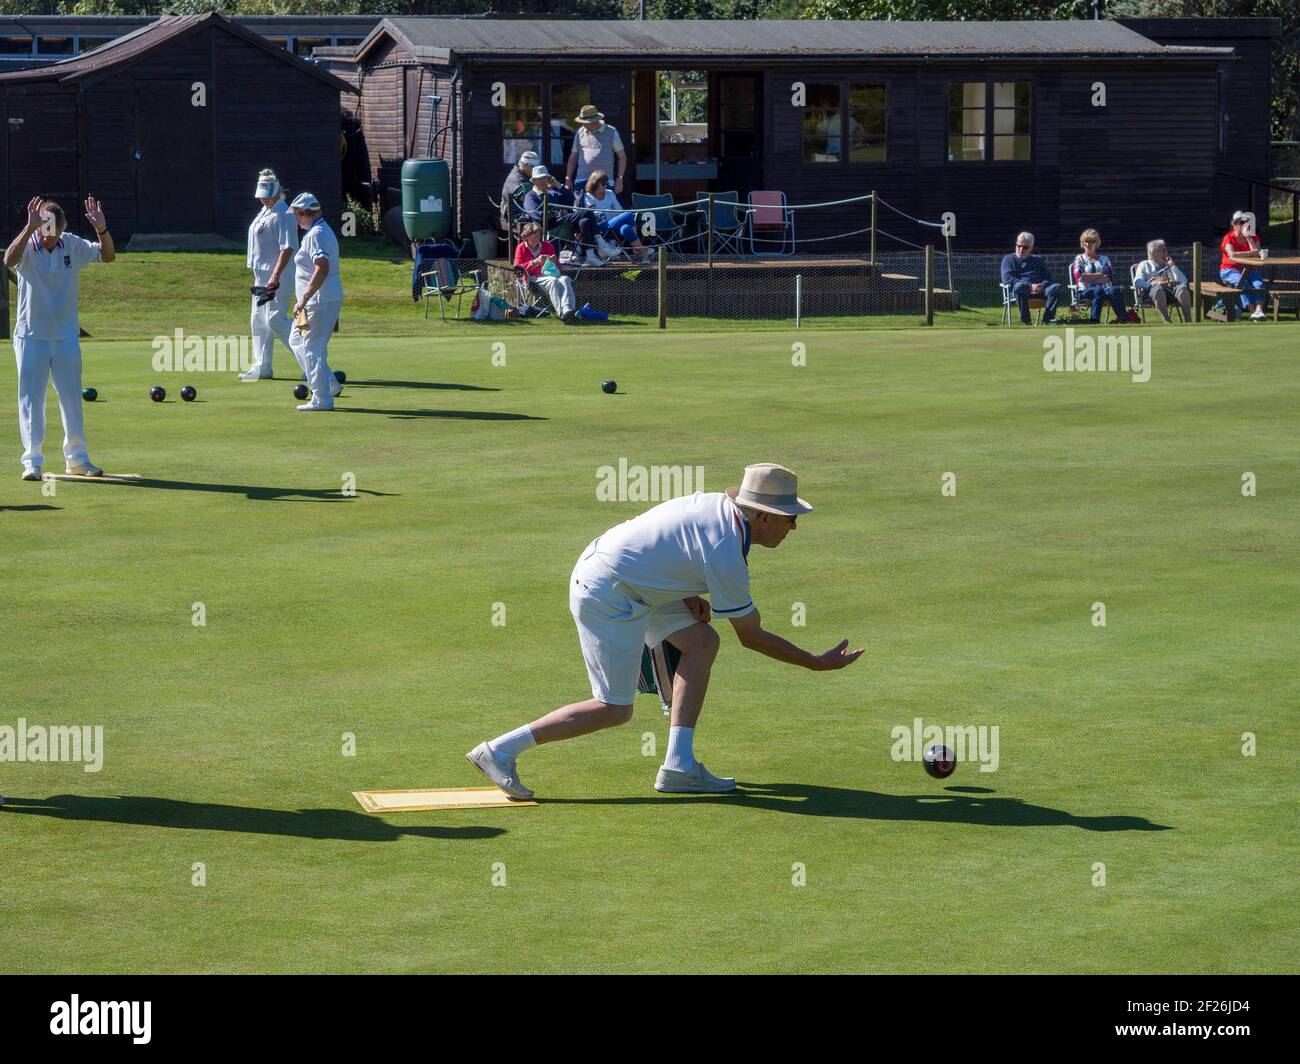 ISLE OF THORNS, SUSSEX/UK - SEPTEMBER 11 : Lawn Bowls Match at Isle of Thorns Chelwood Gate in Sussex on September 11, 2016. Uni Stock Photo